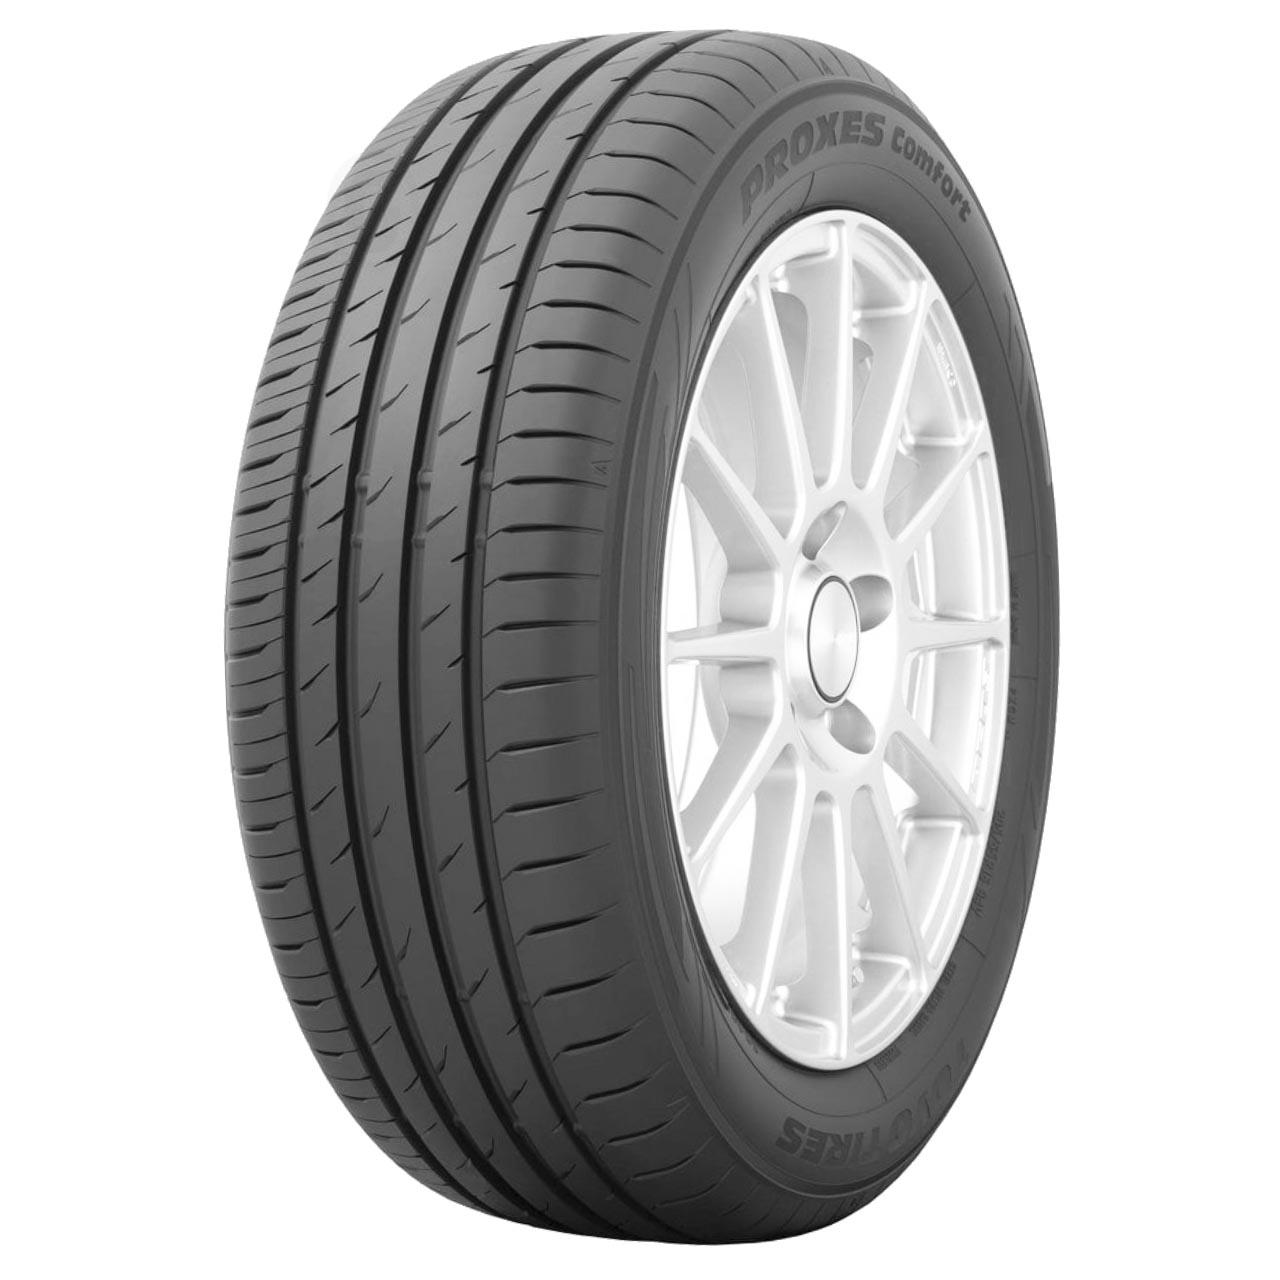 Toyo Proxes Comfort 205/55R16 91V